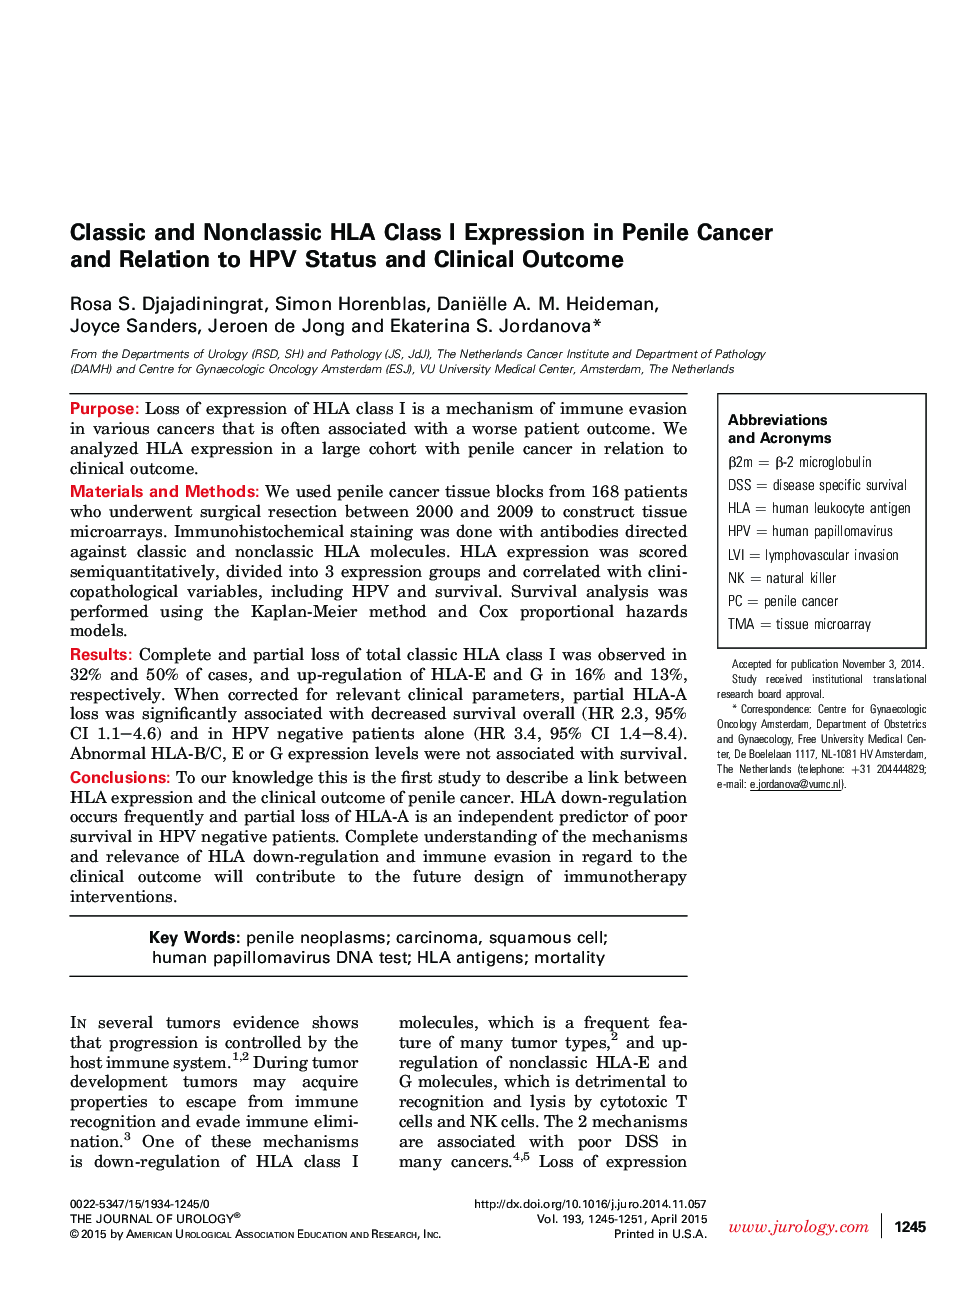 Classic and Nonclassic HLA Class I Expression in Penile Cancer and Relation to HPV Status and Clinical Outcome 